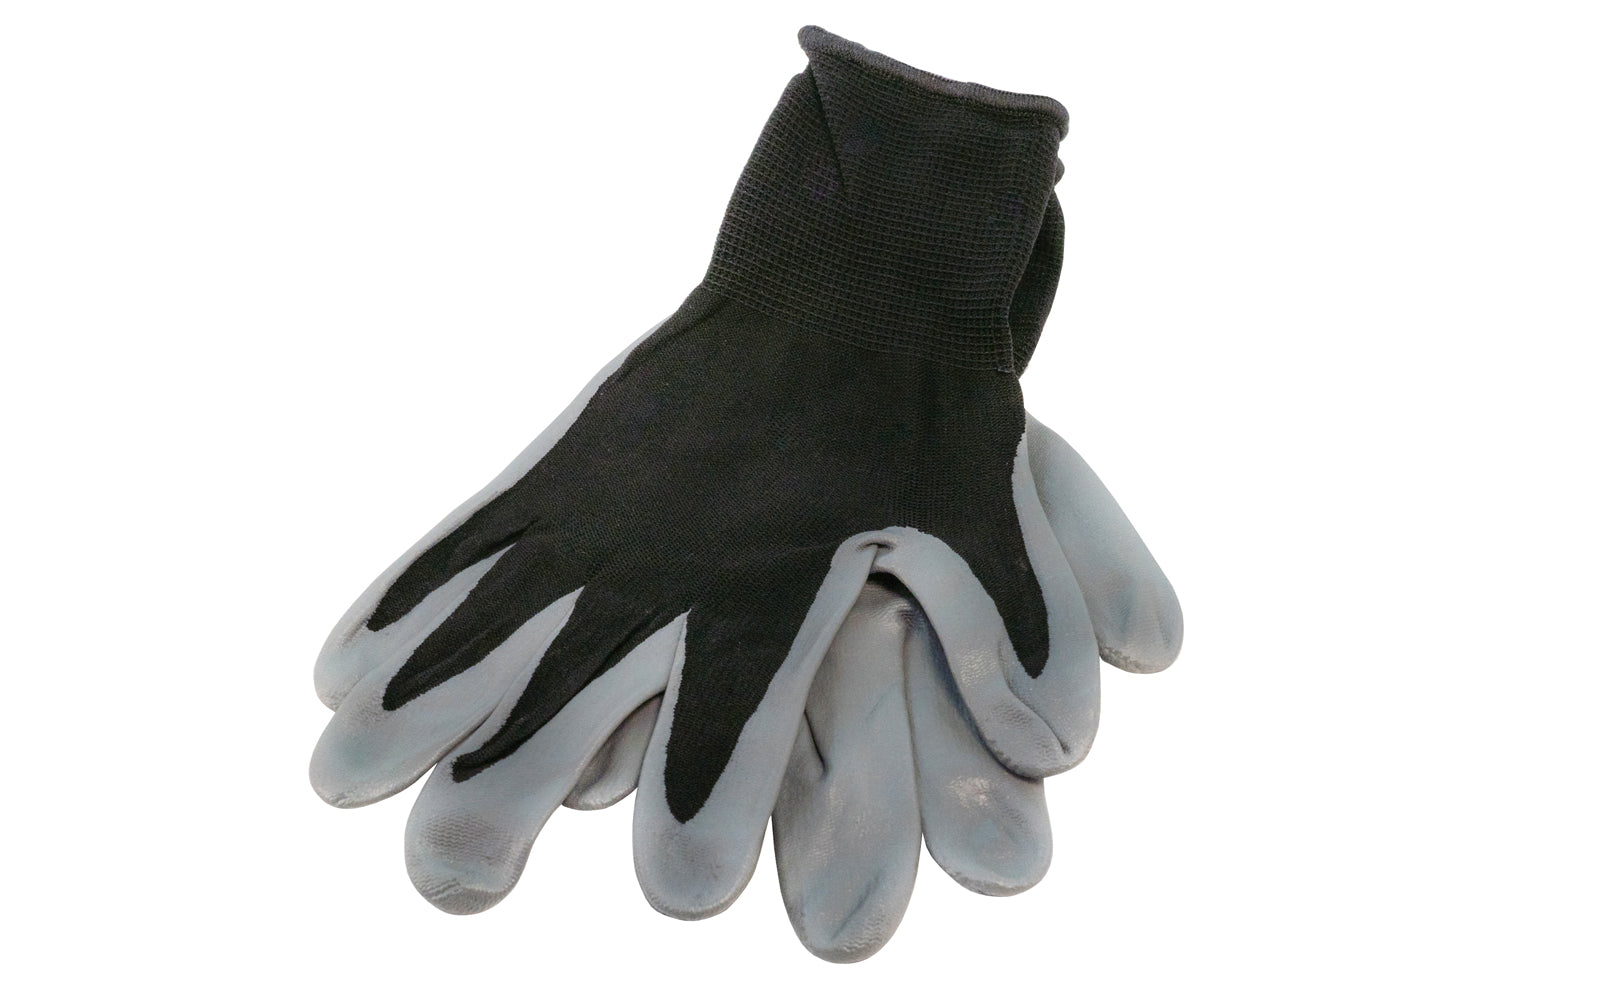 Nitrile Coated Palm Nylon Gloves. Features a nitrile coated palm for increased grip. Provides maximum dexterity & tactility. Resistant to abrasions. Available in small, medium, & large sizes. S, M, L sizing